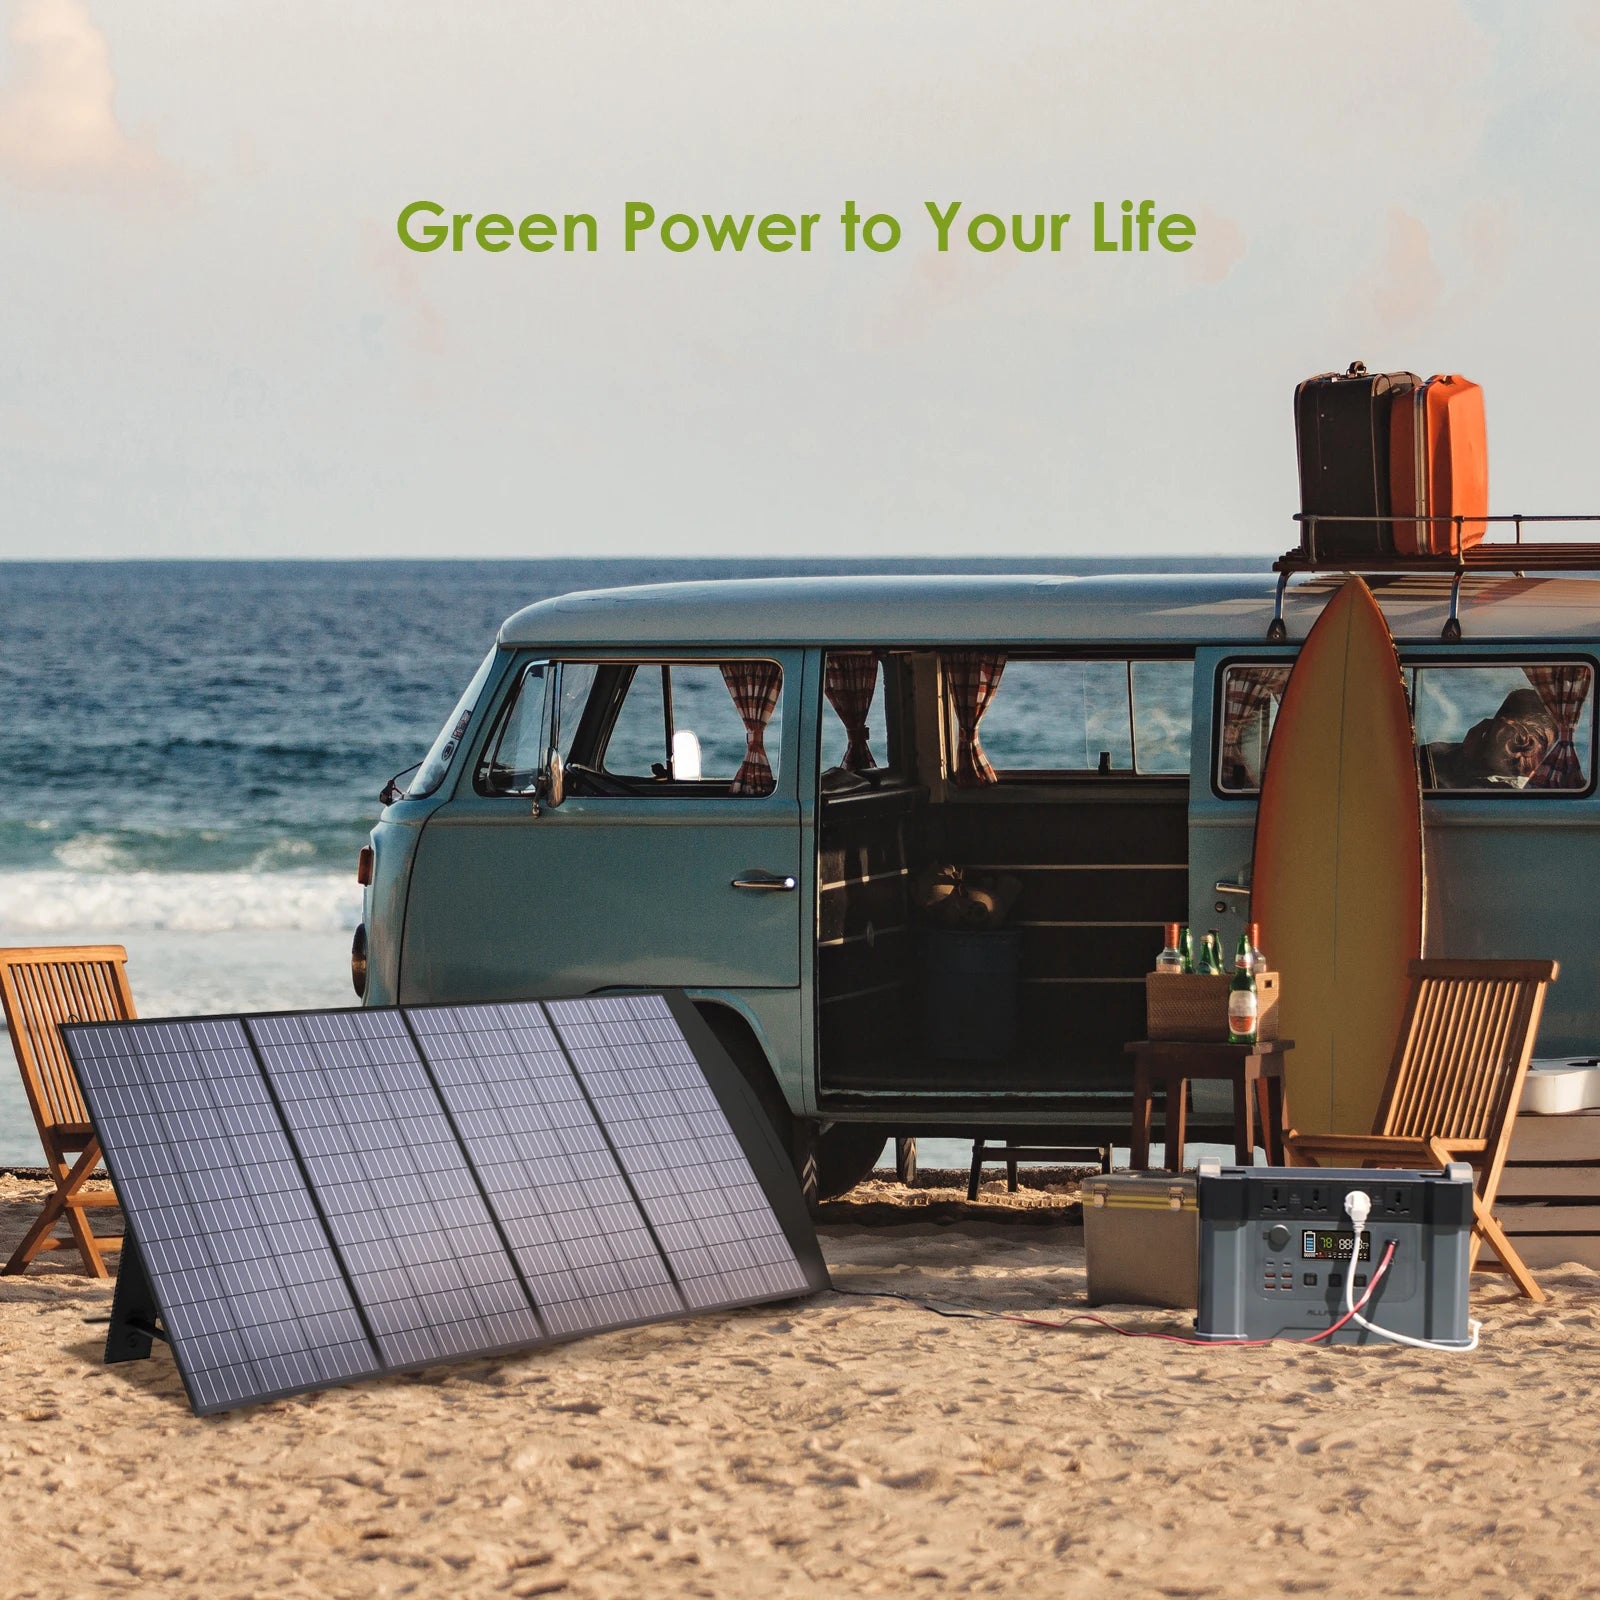 Eco-friendly portable solar charger certified for safe use outdoors.